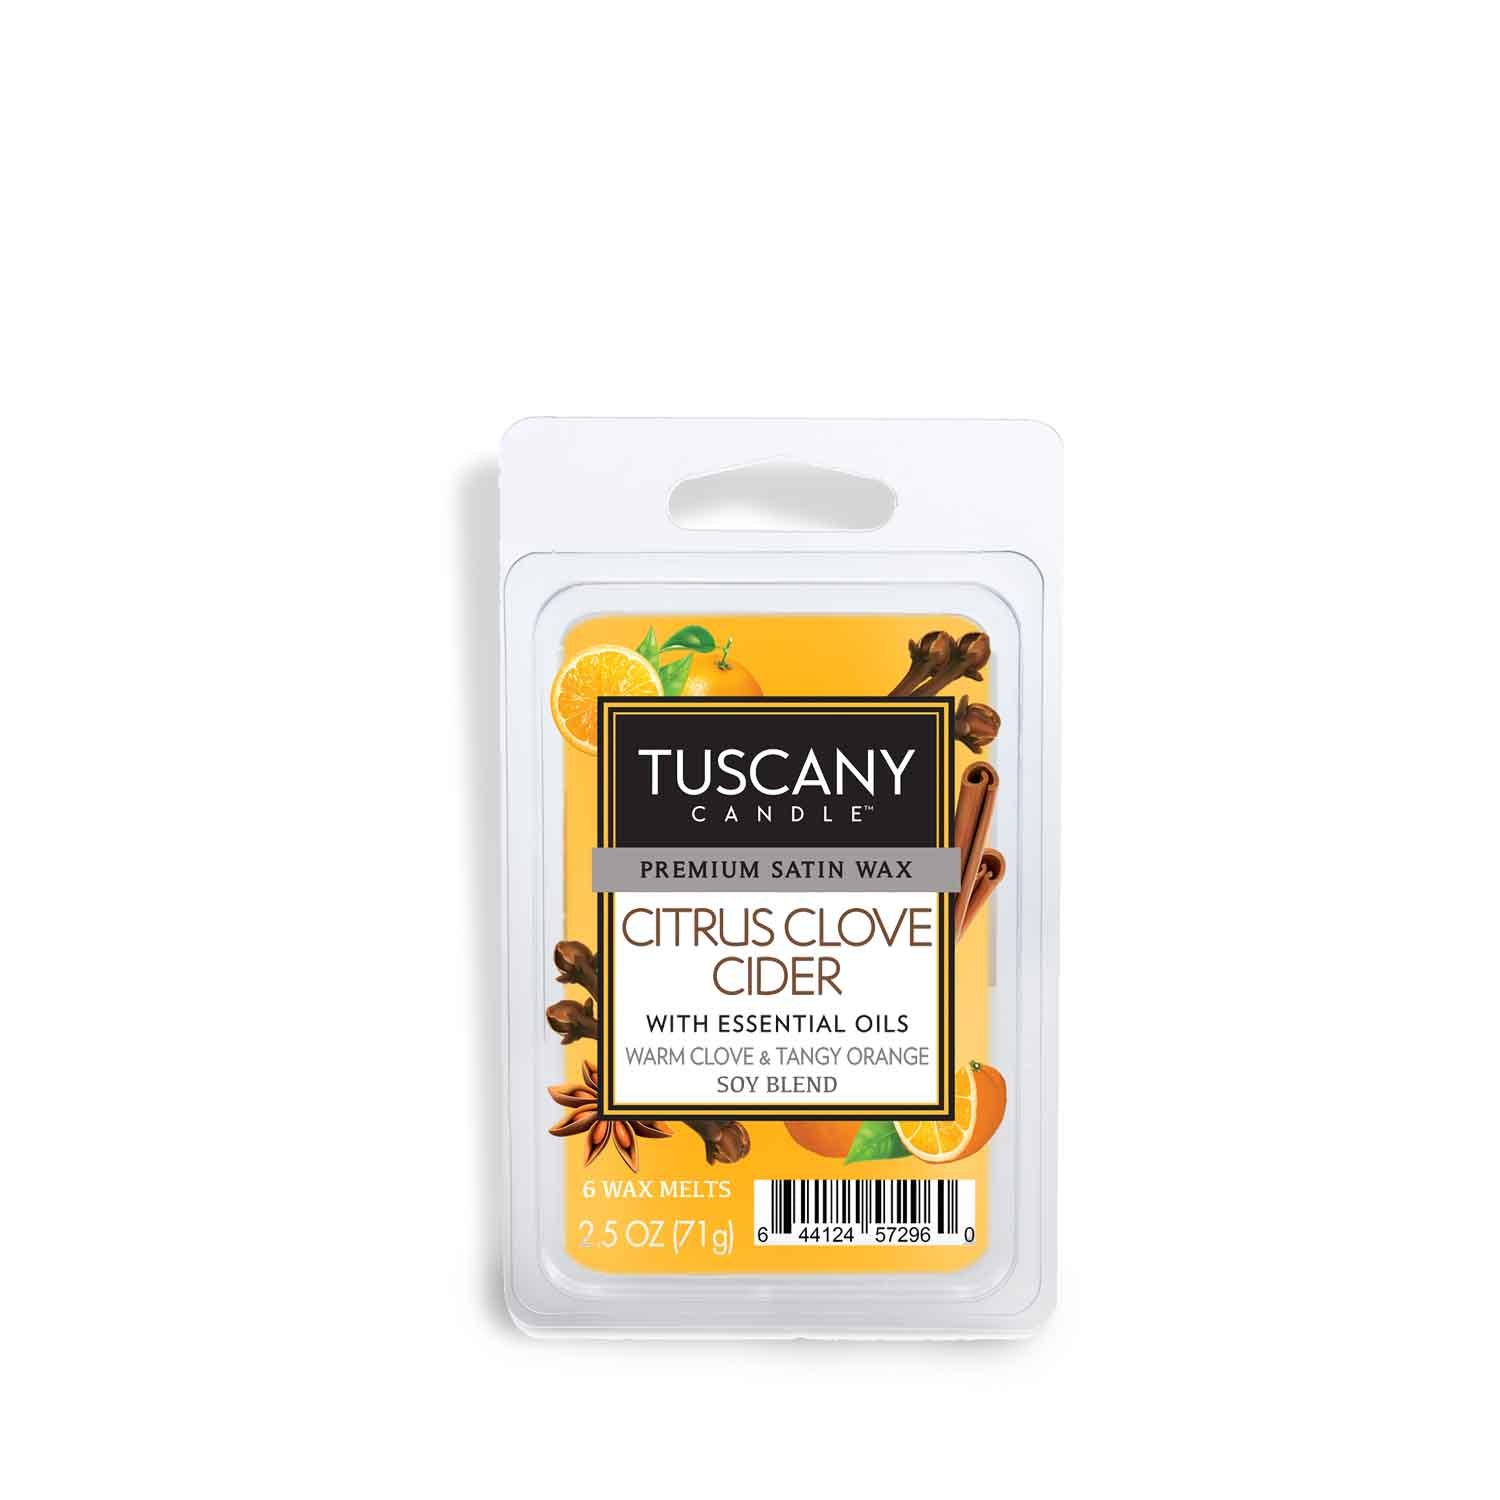 Explore the essence of Tuscany through our indulgent Citrus Clove Cider Scented Wax Melt (2.5 oz) bars from Tuscany Candle®. Infused with vibrant citrus notes, these tarts transport you to the picturesque landscapes and sun-soaked vineyards.